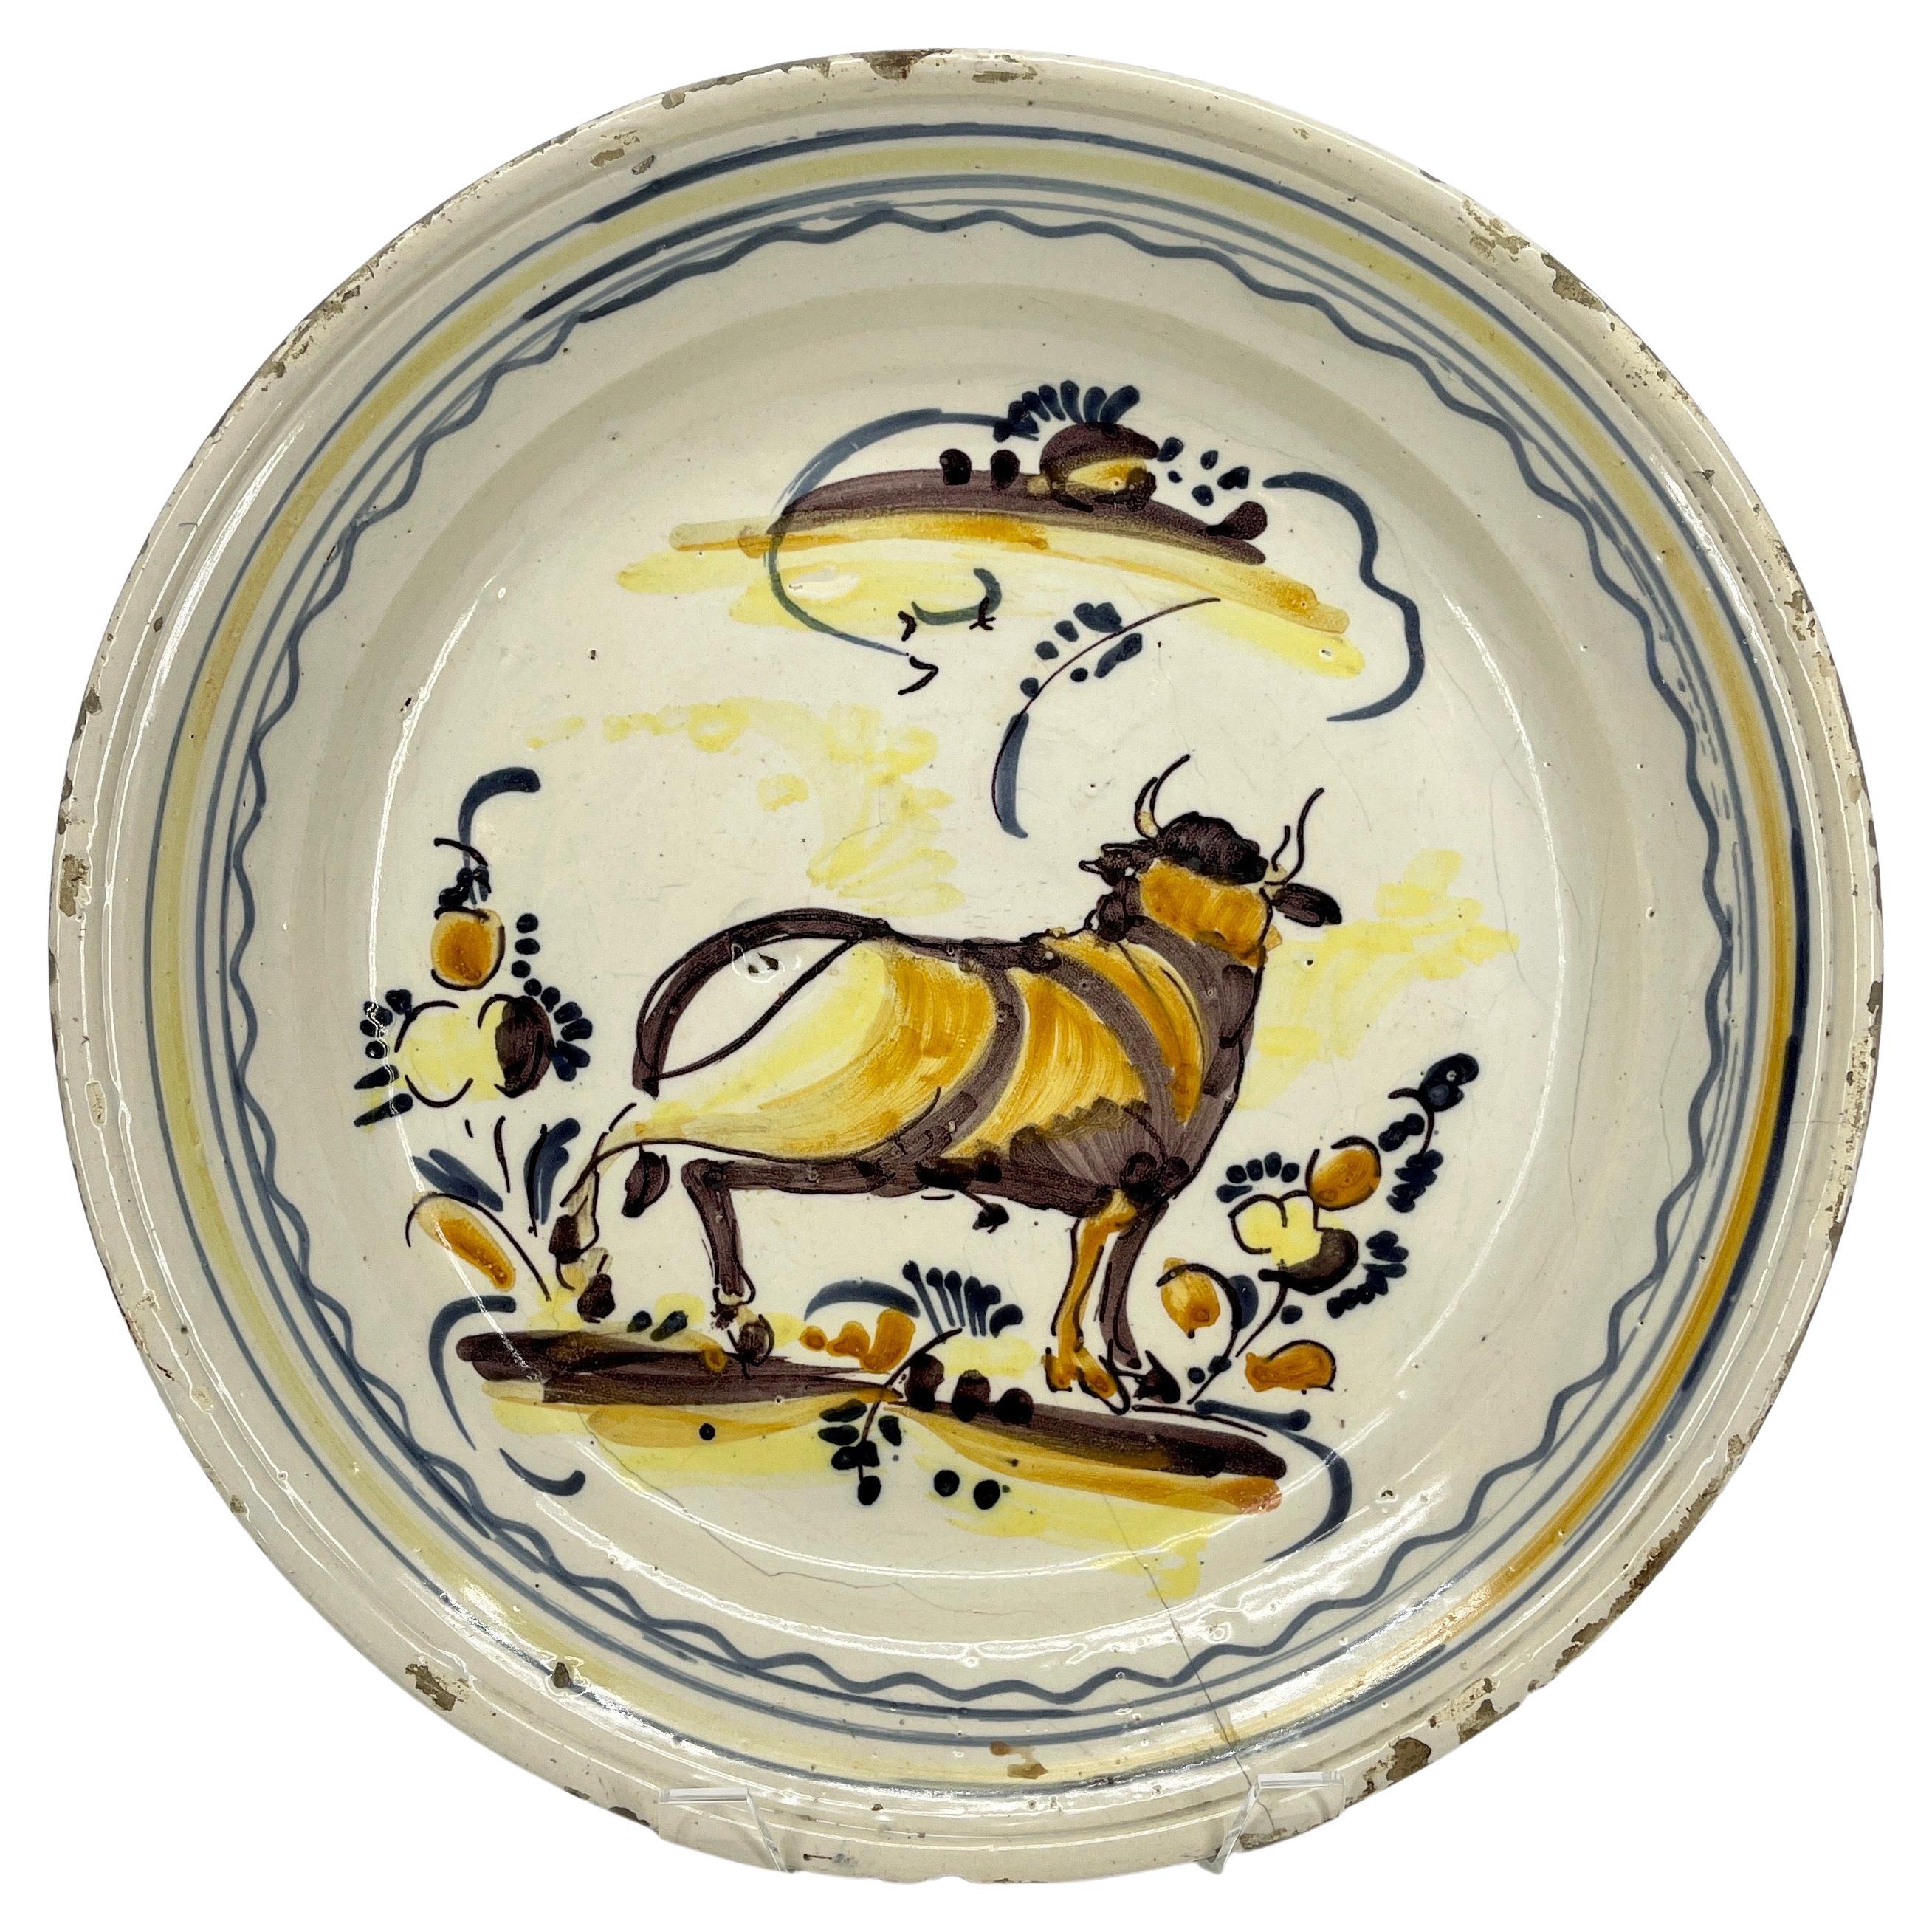 Antique Spanish Polychrome Ceramic Charger with a Bull Decoration For Sale